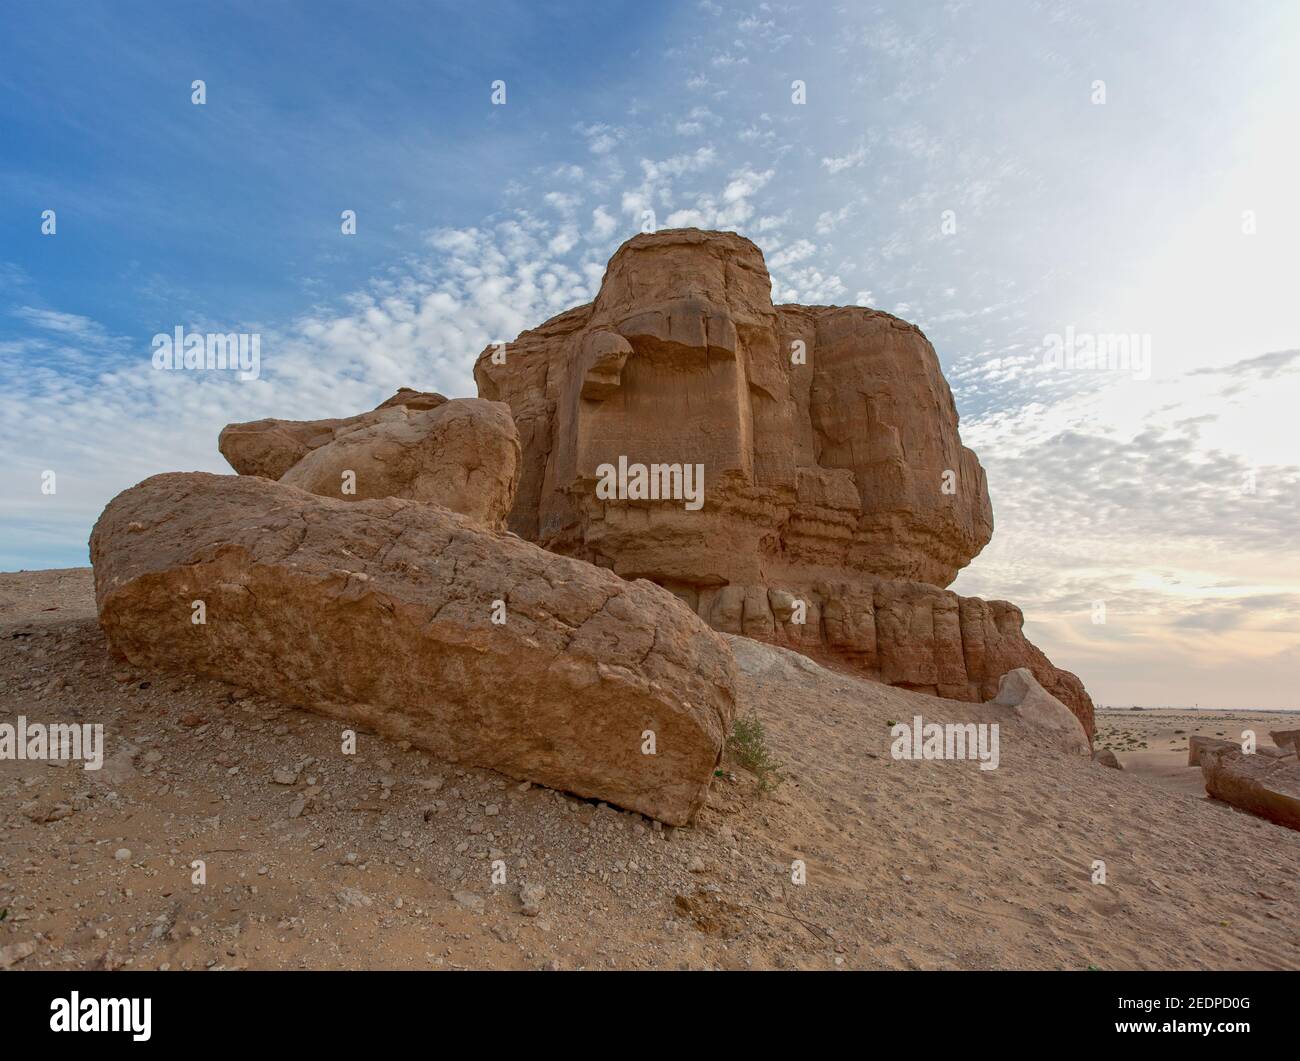 One of the rocks named Four Mountains near Hofuf in Saudi Arabia Stock Photo